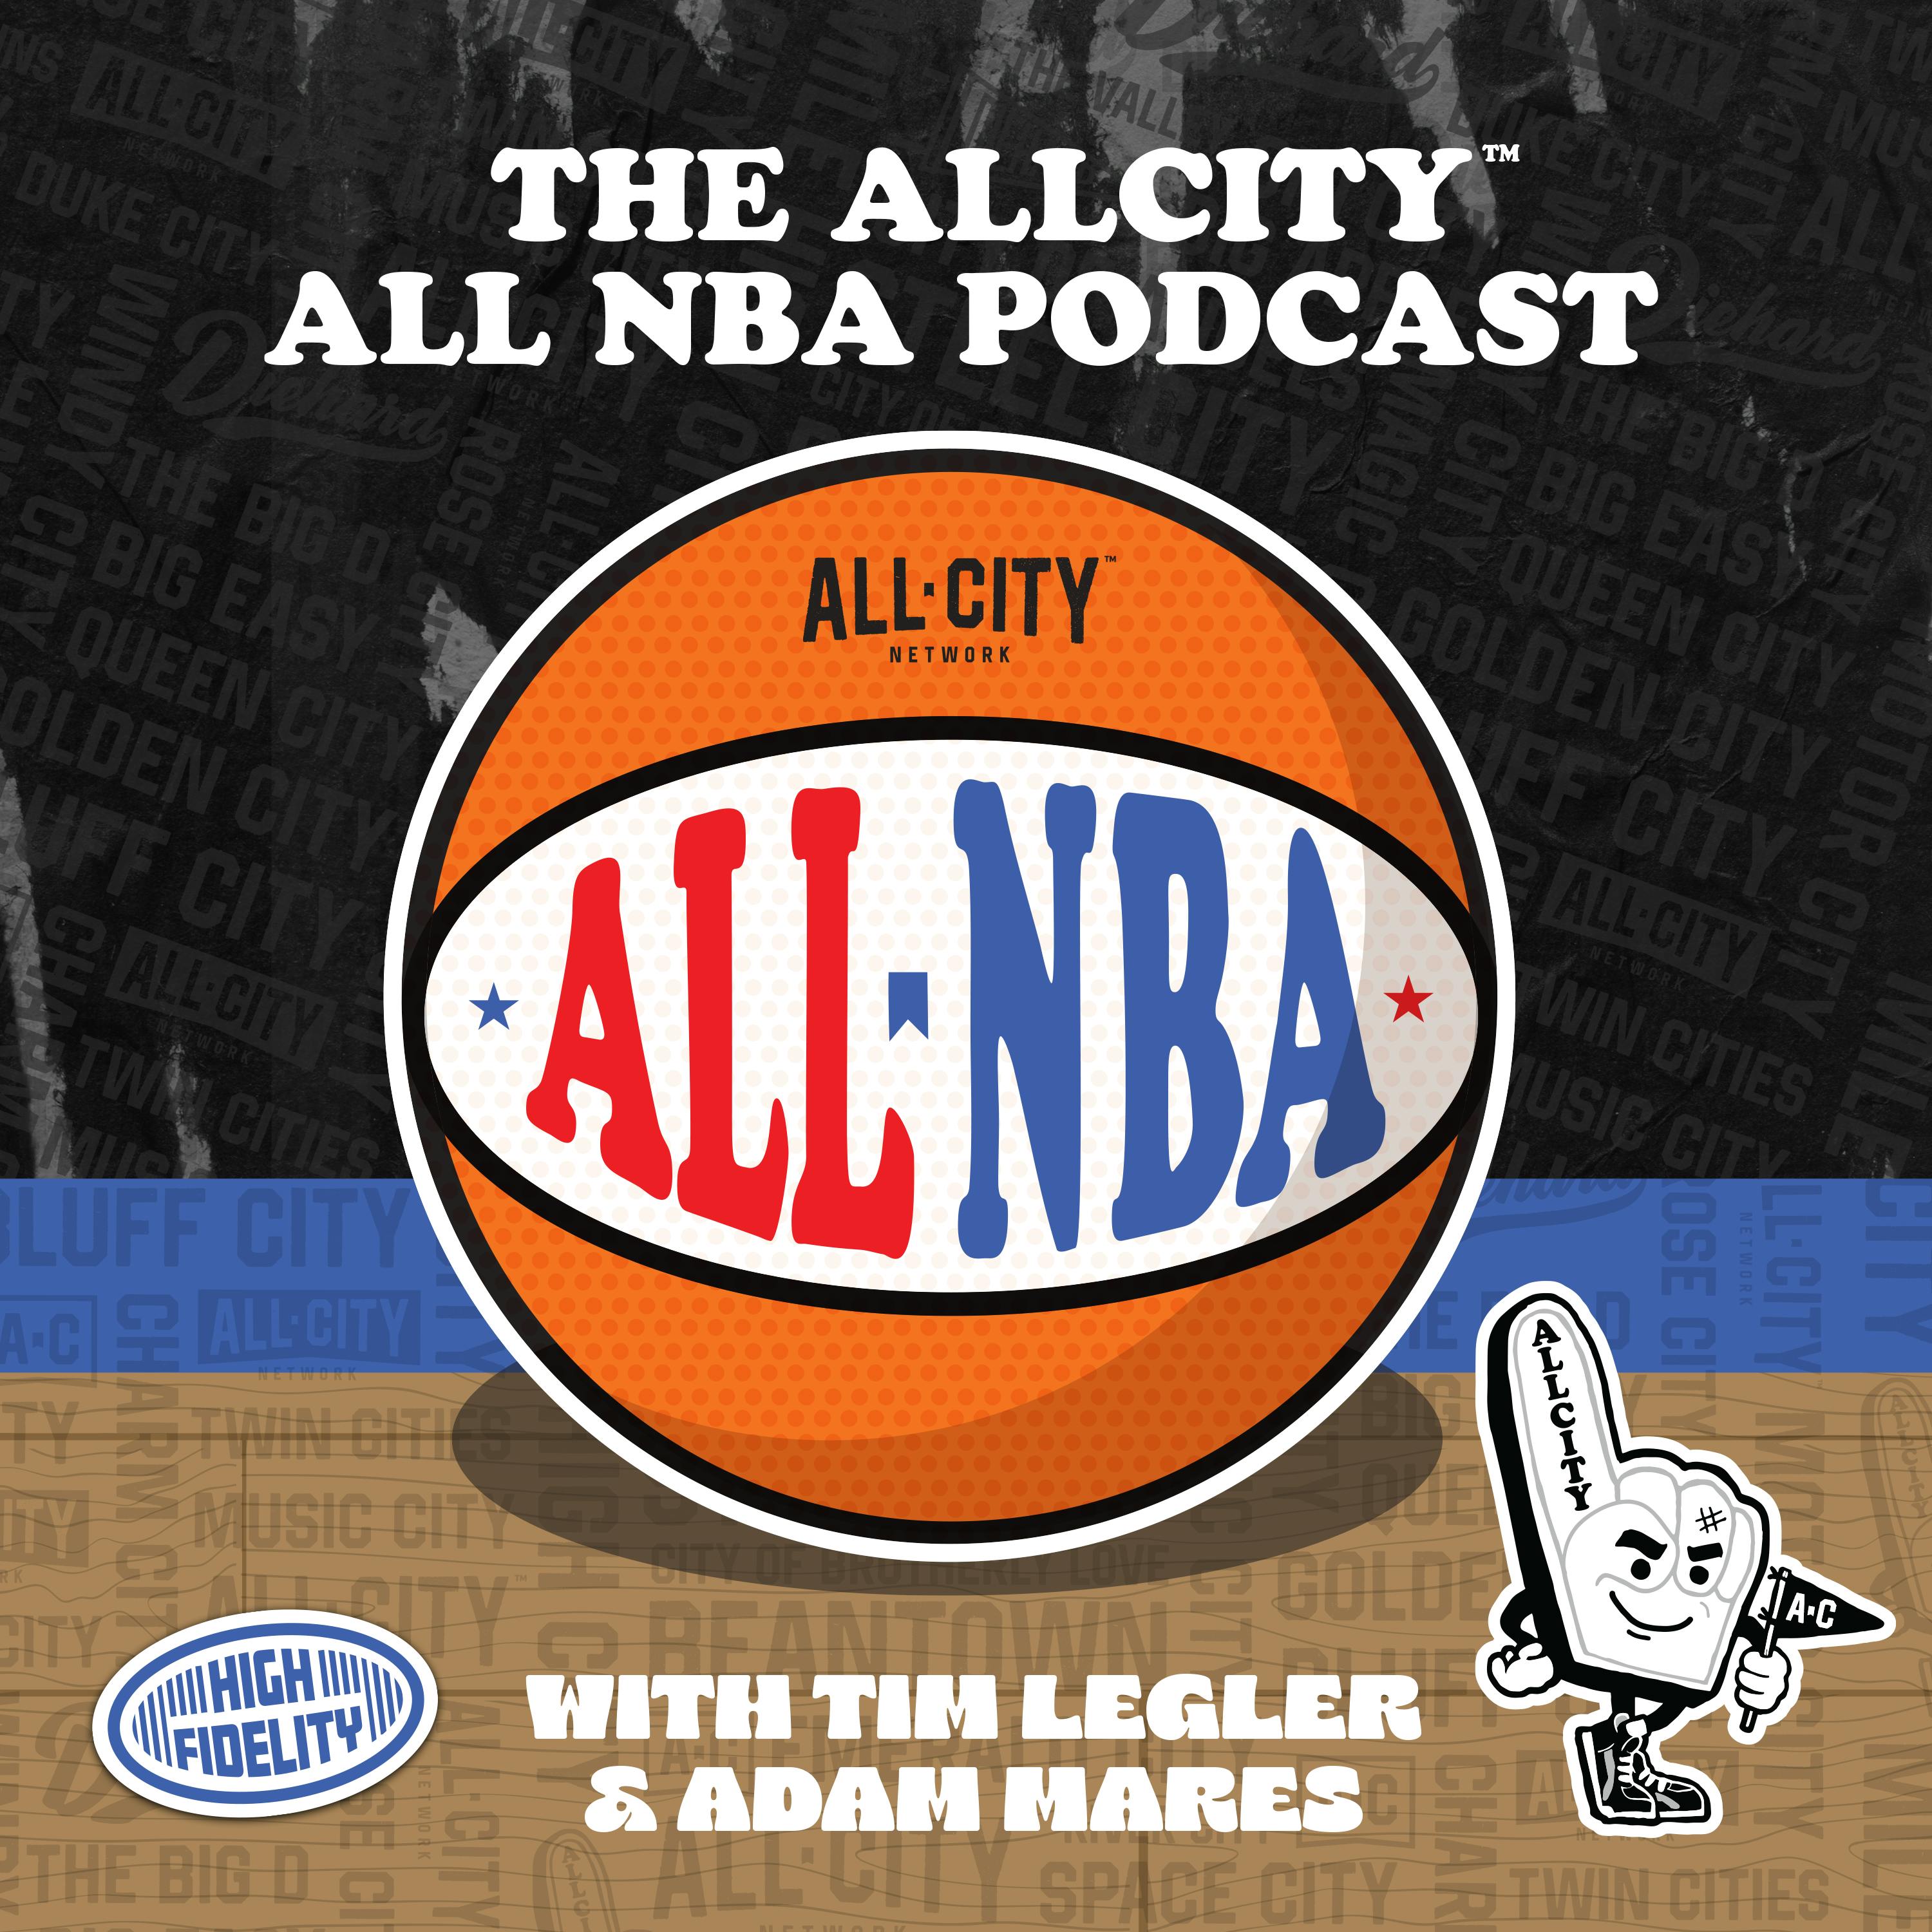 The ALL NBA Podcast: Have Joel Embiid and the 76ers found the blueprint against the Knicks?